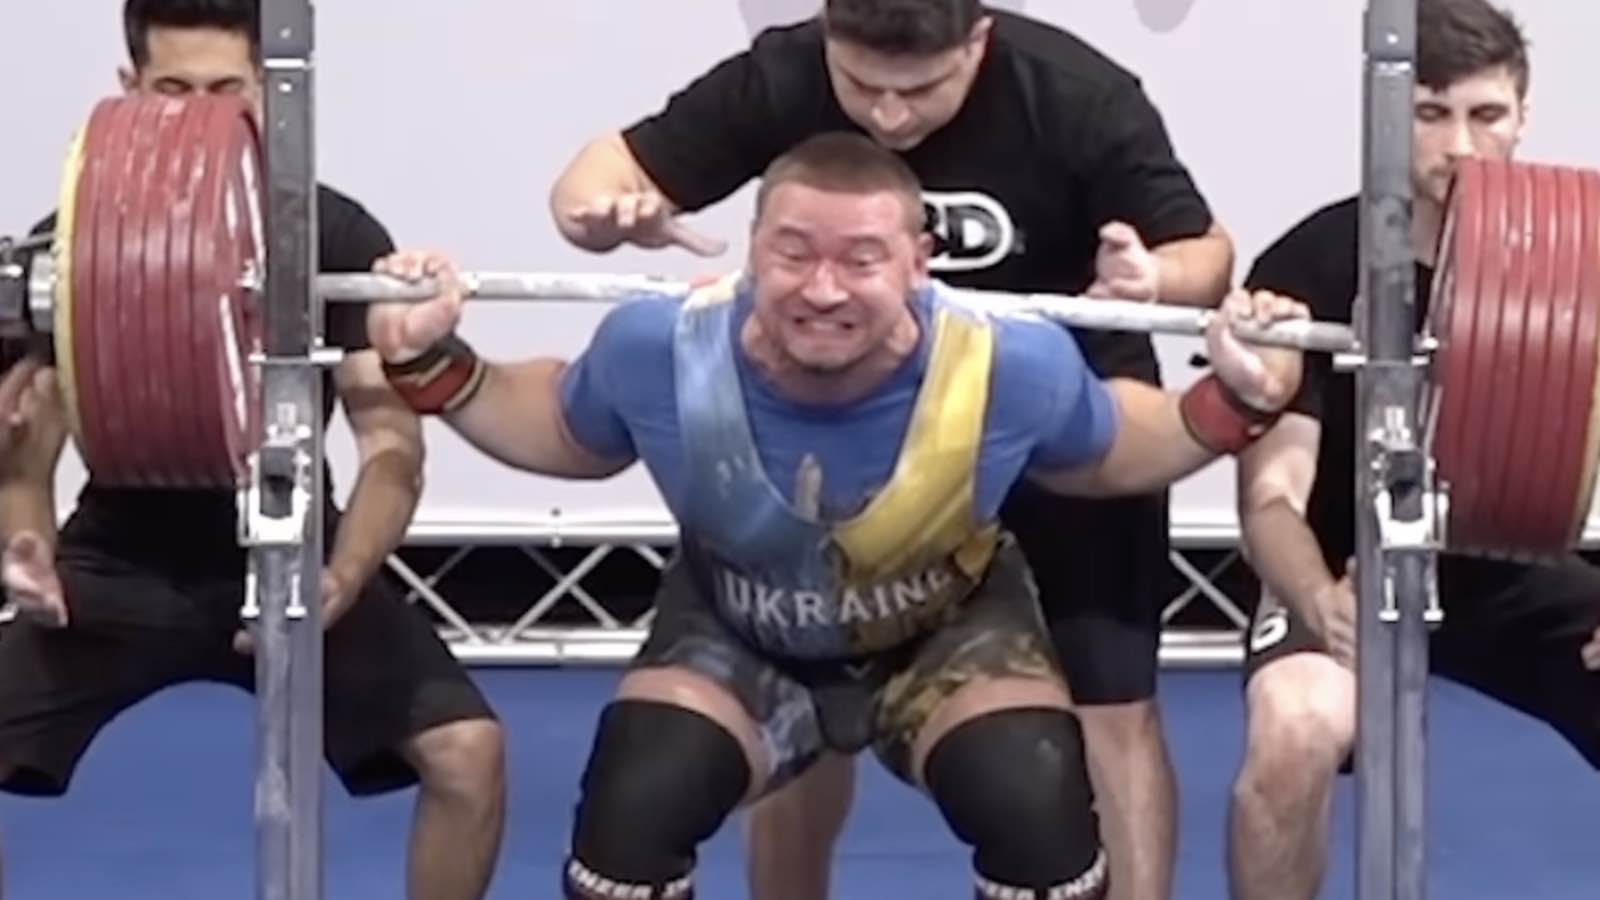 anatolii-novopismennyi-(105kg)-scores-world-record-squat-and-total-with-2023-ipf-worlds-victory-–-breaking-muscle